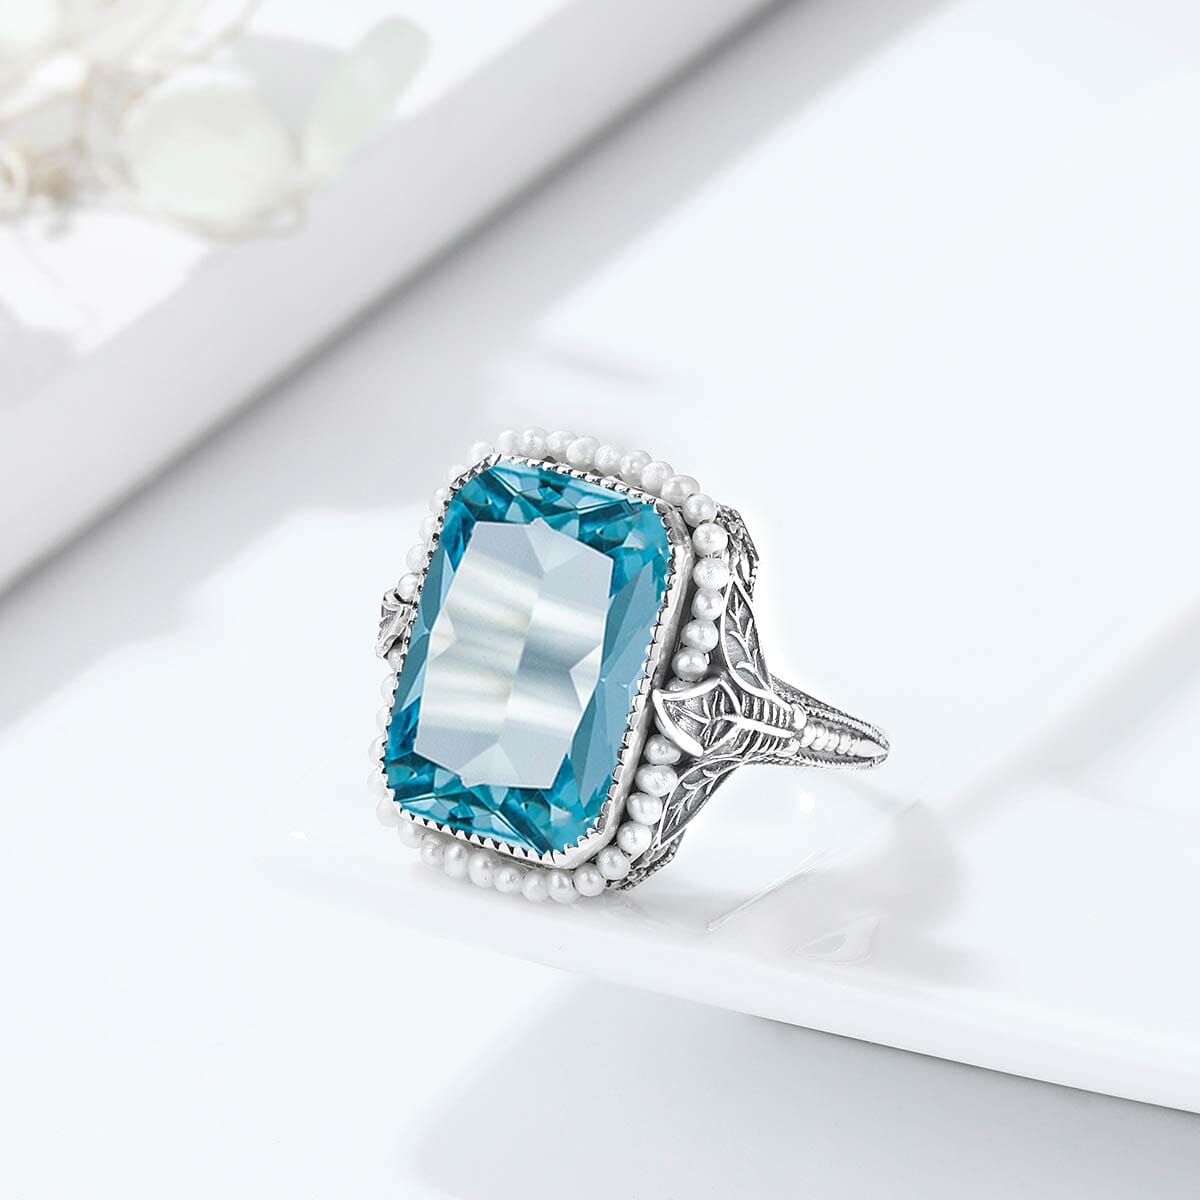 Aquamarine Ring With Natural Fresh Water Peals - 925 Sterling SilverRing